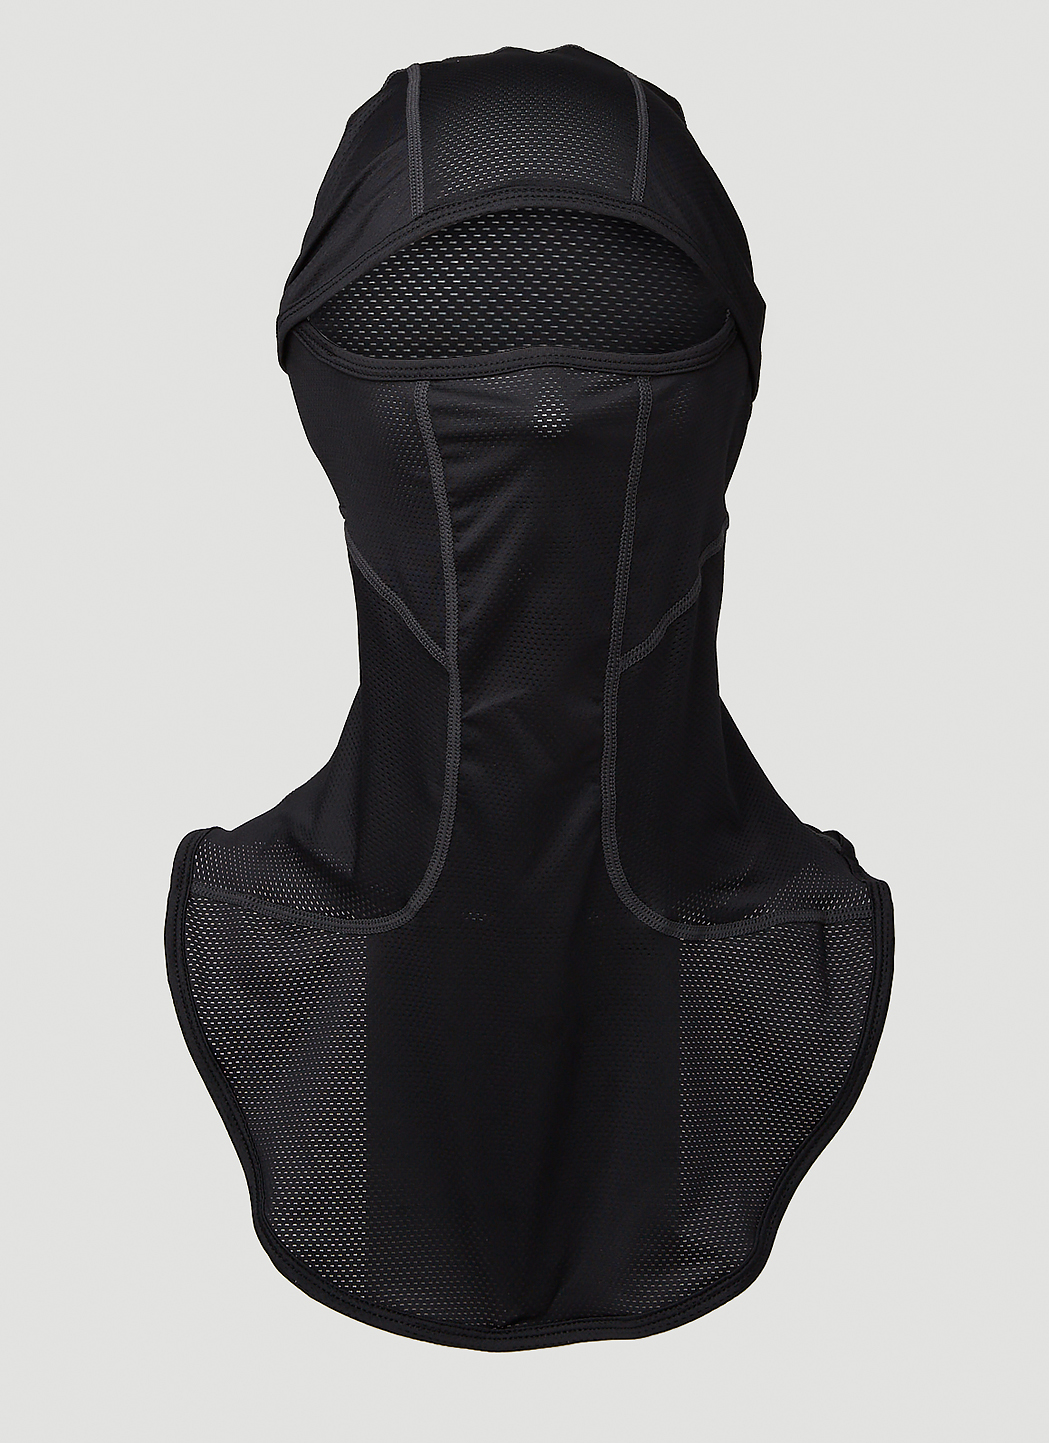 POST ARCHIVE FACTION (PAF) 5.0 Balaclava